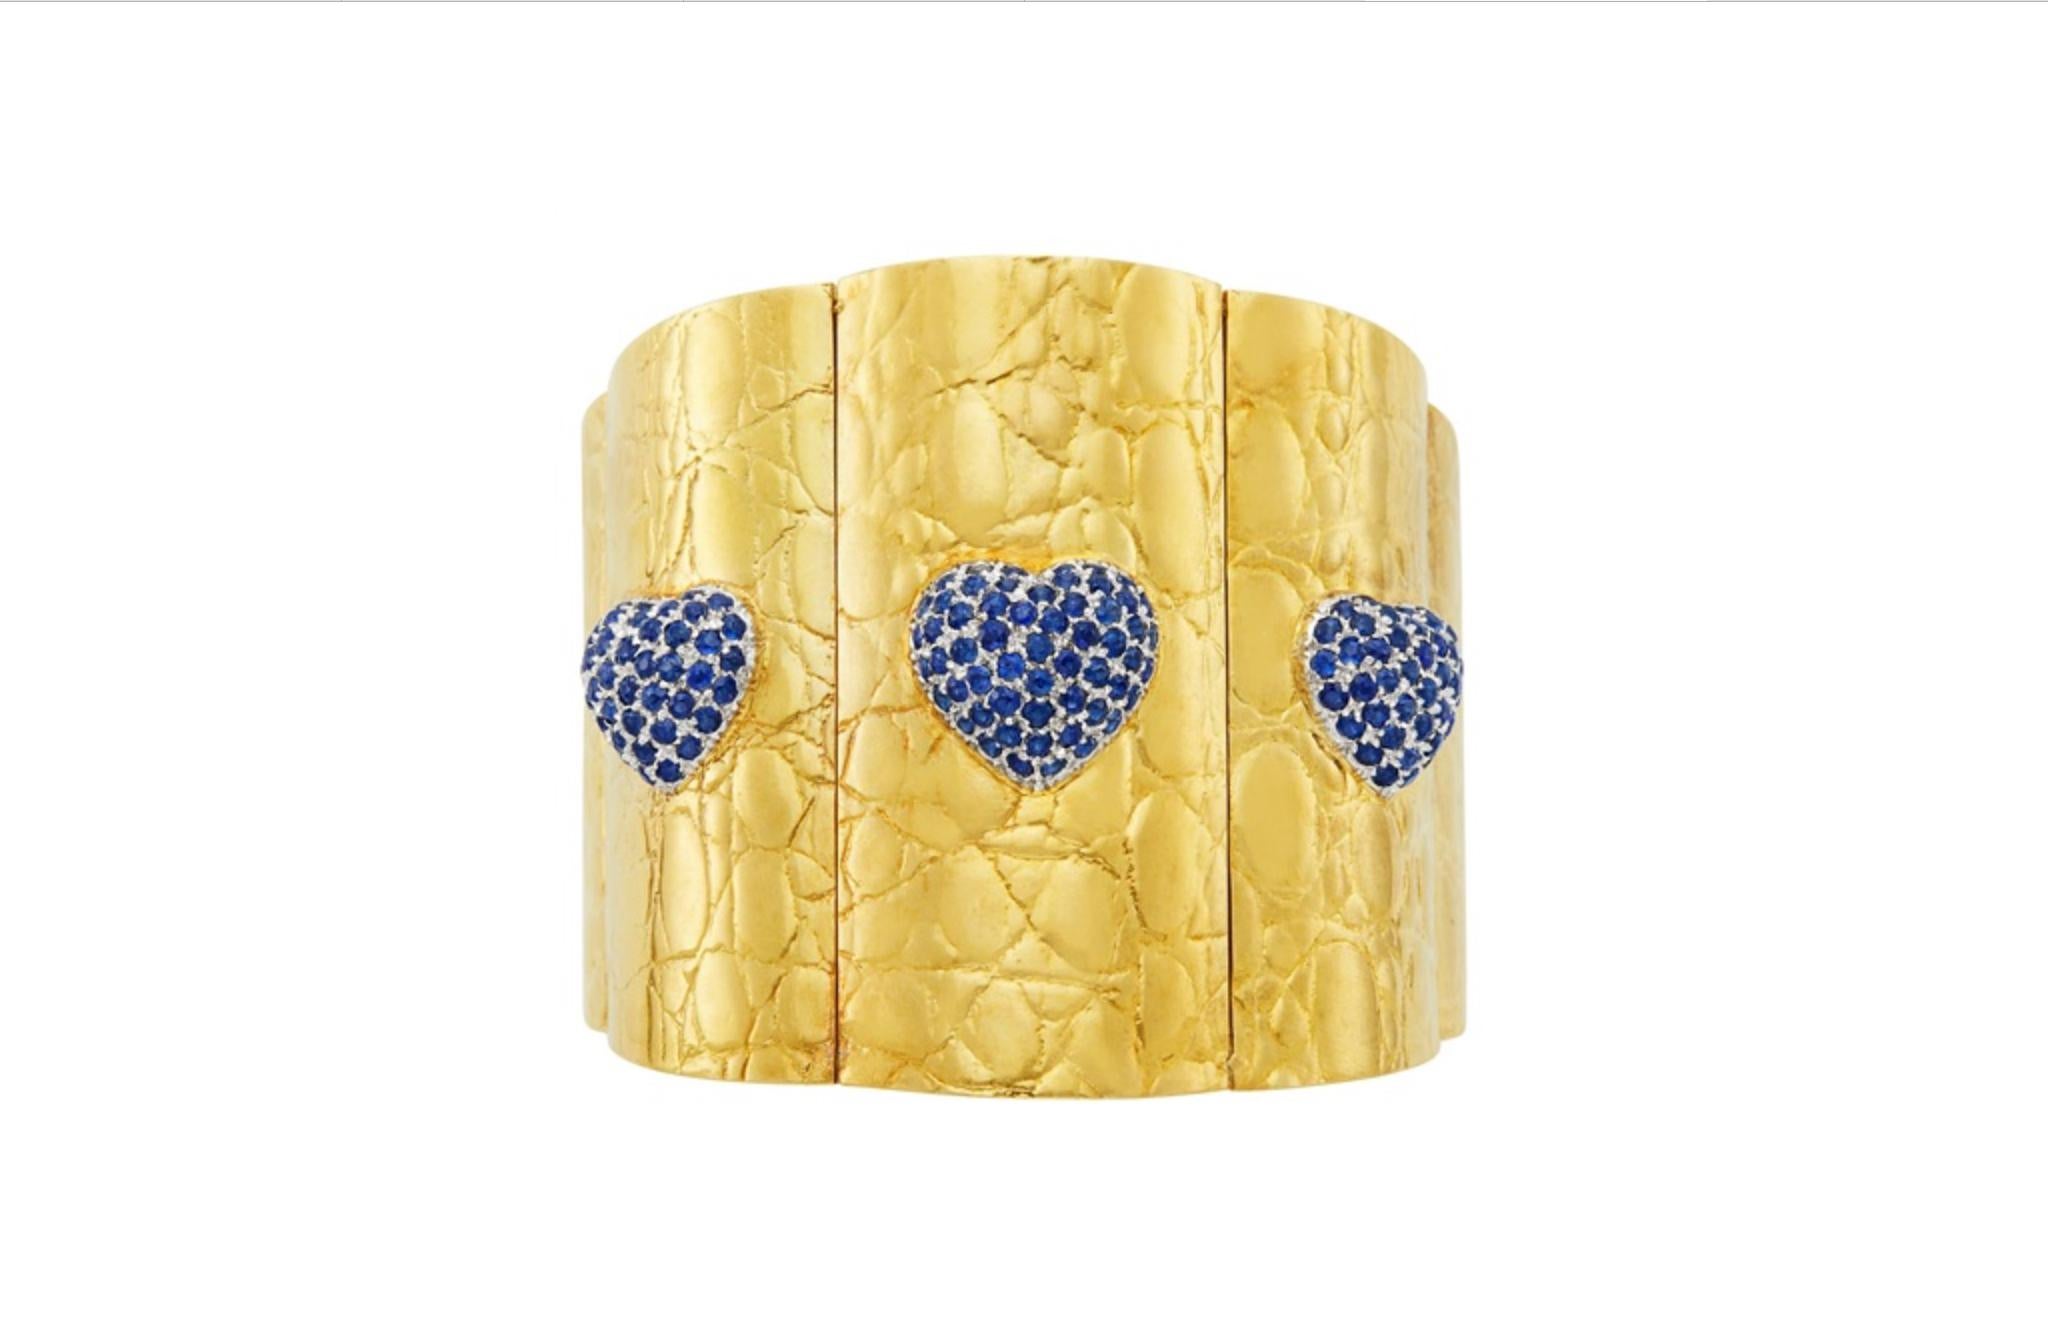 1970s Gucci cuff bracelet in 18kt yellow gold featuring sapphire hearts. Matching earrings available.
Bracelet measures 6.75 in. (17.1 cm.)